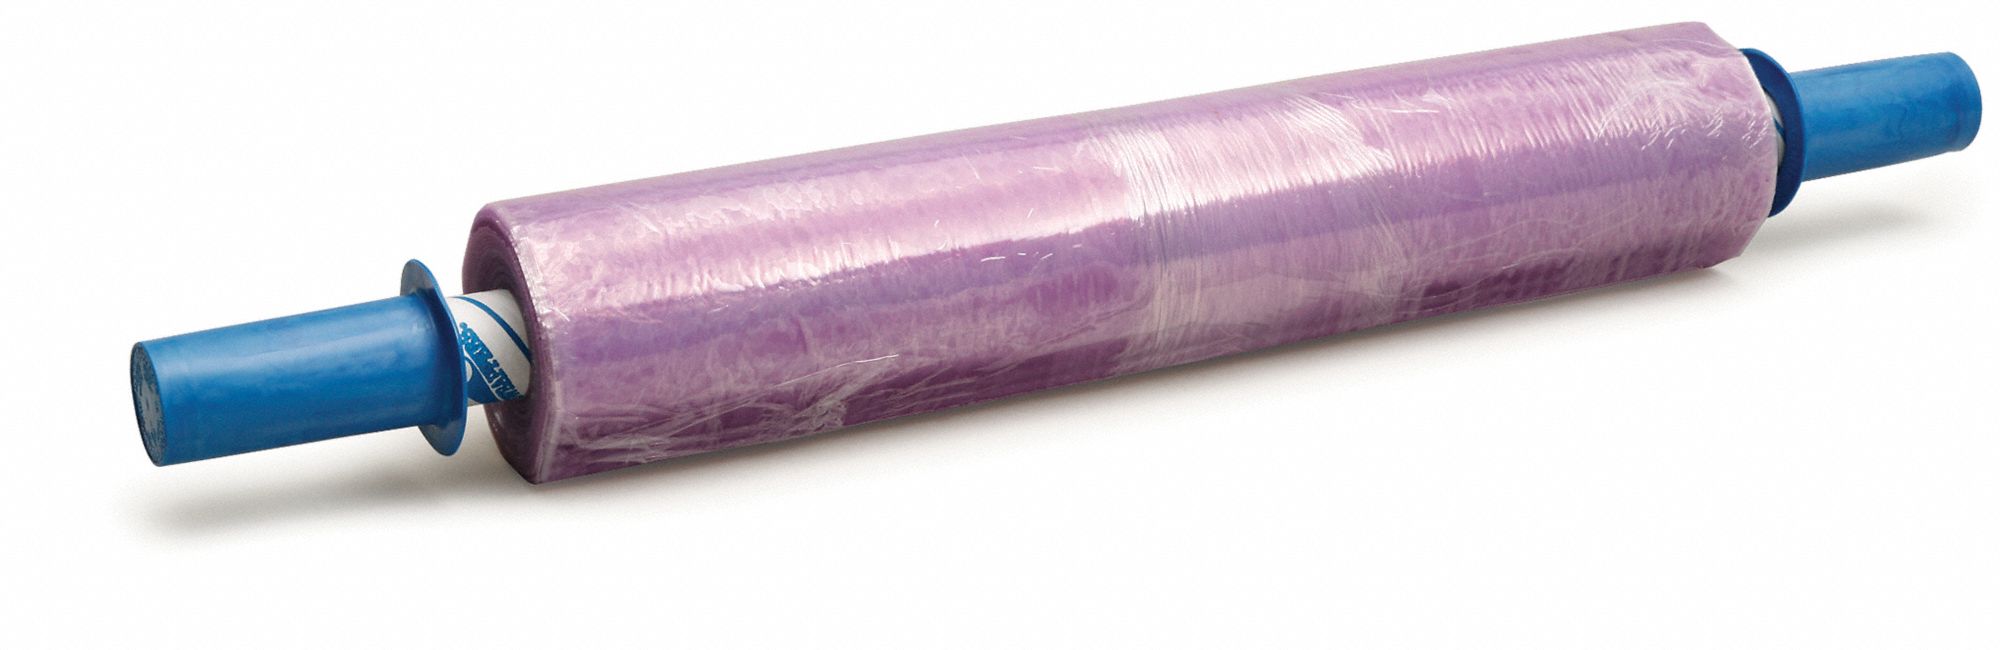 Stretch Wrap: 80 ga Gauge, 30 in Overall Wd, 1,000 ft Overall Lg, Purple, 4 PK